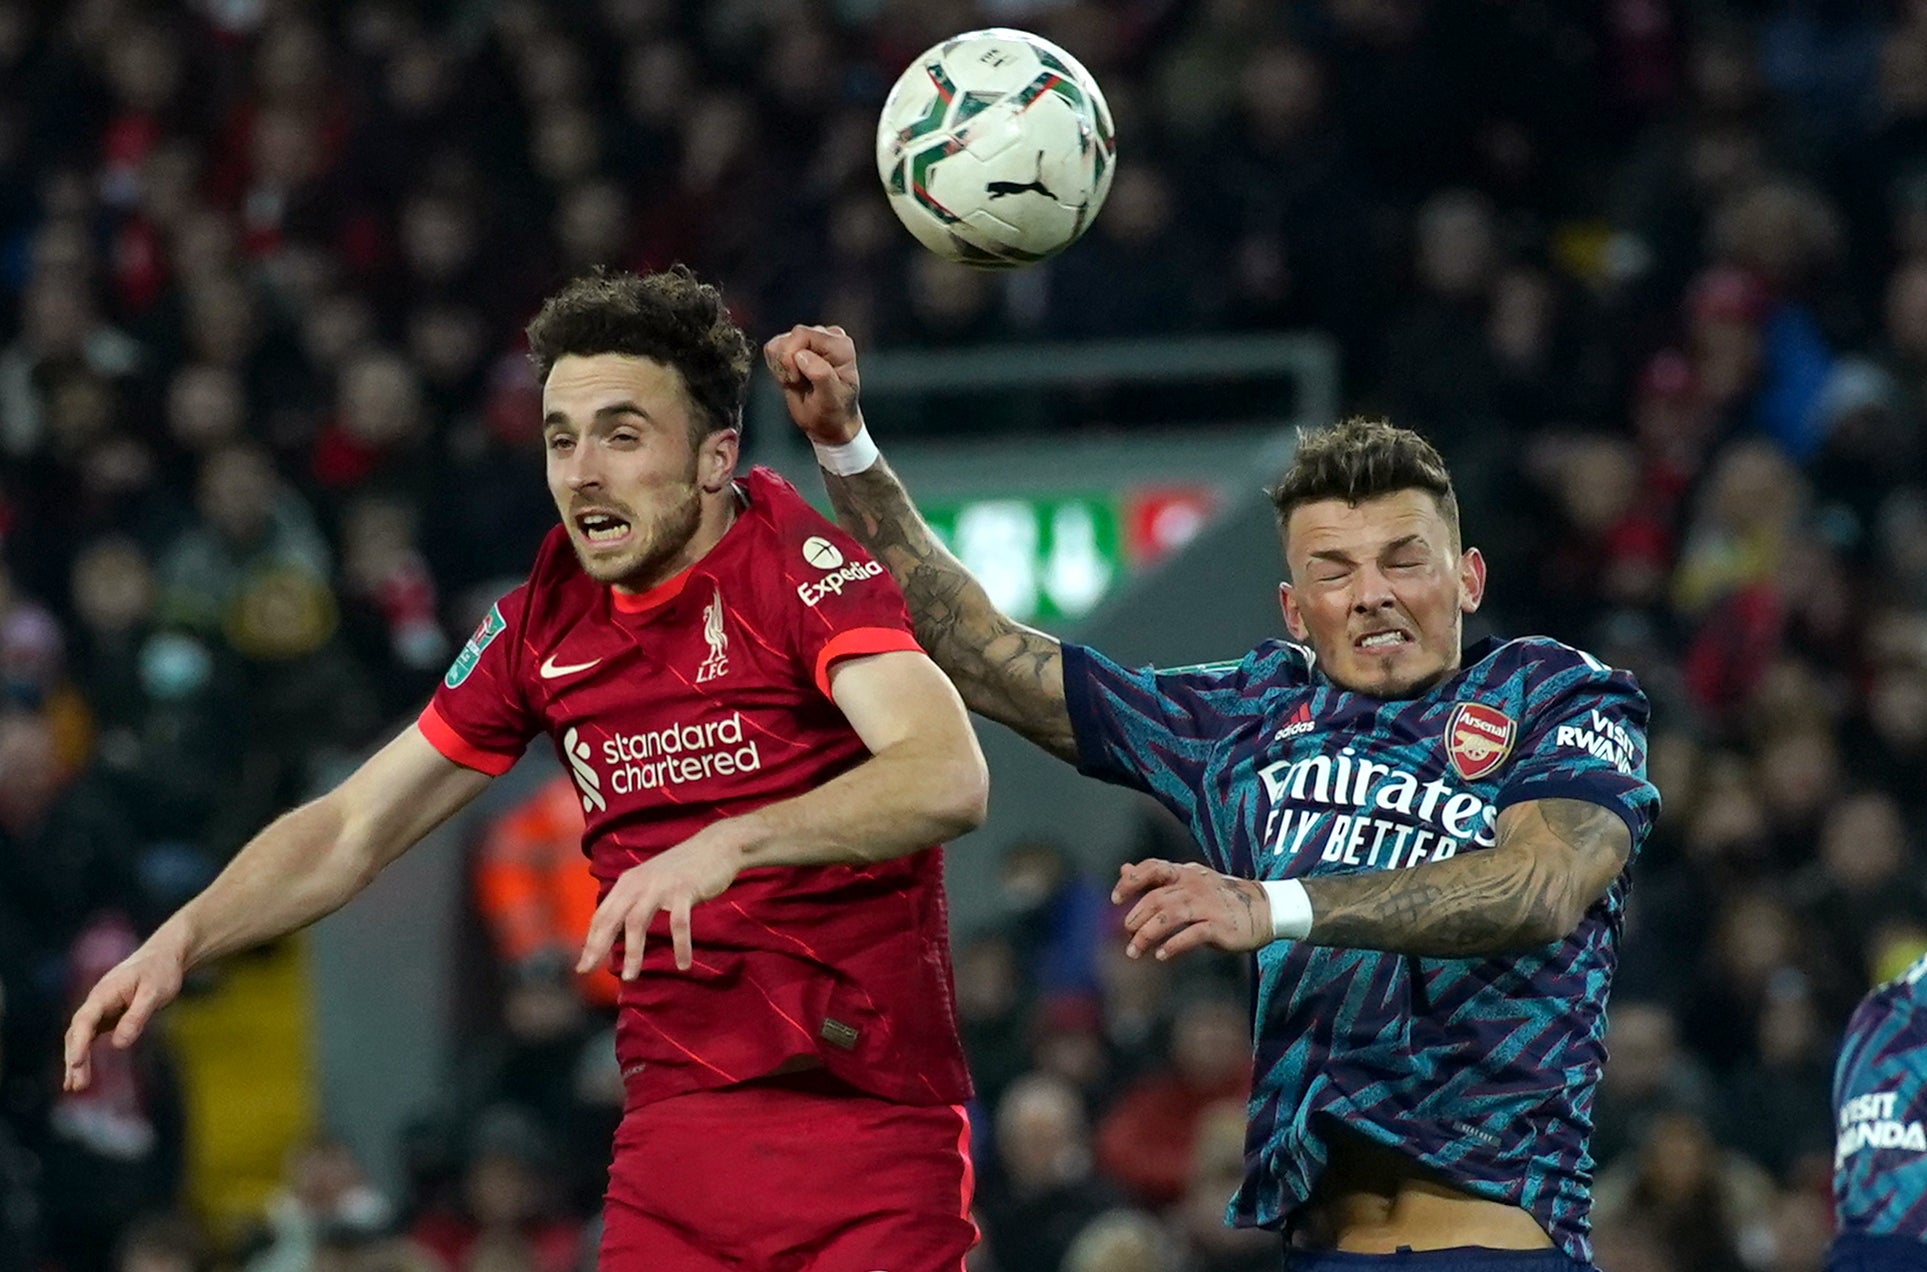 Liverpool and Arsenal played out a goalless draw in the first leg at Anfield last week